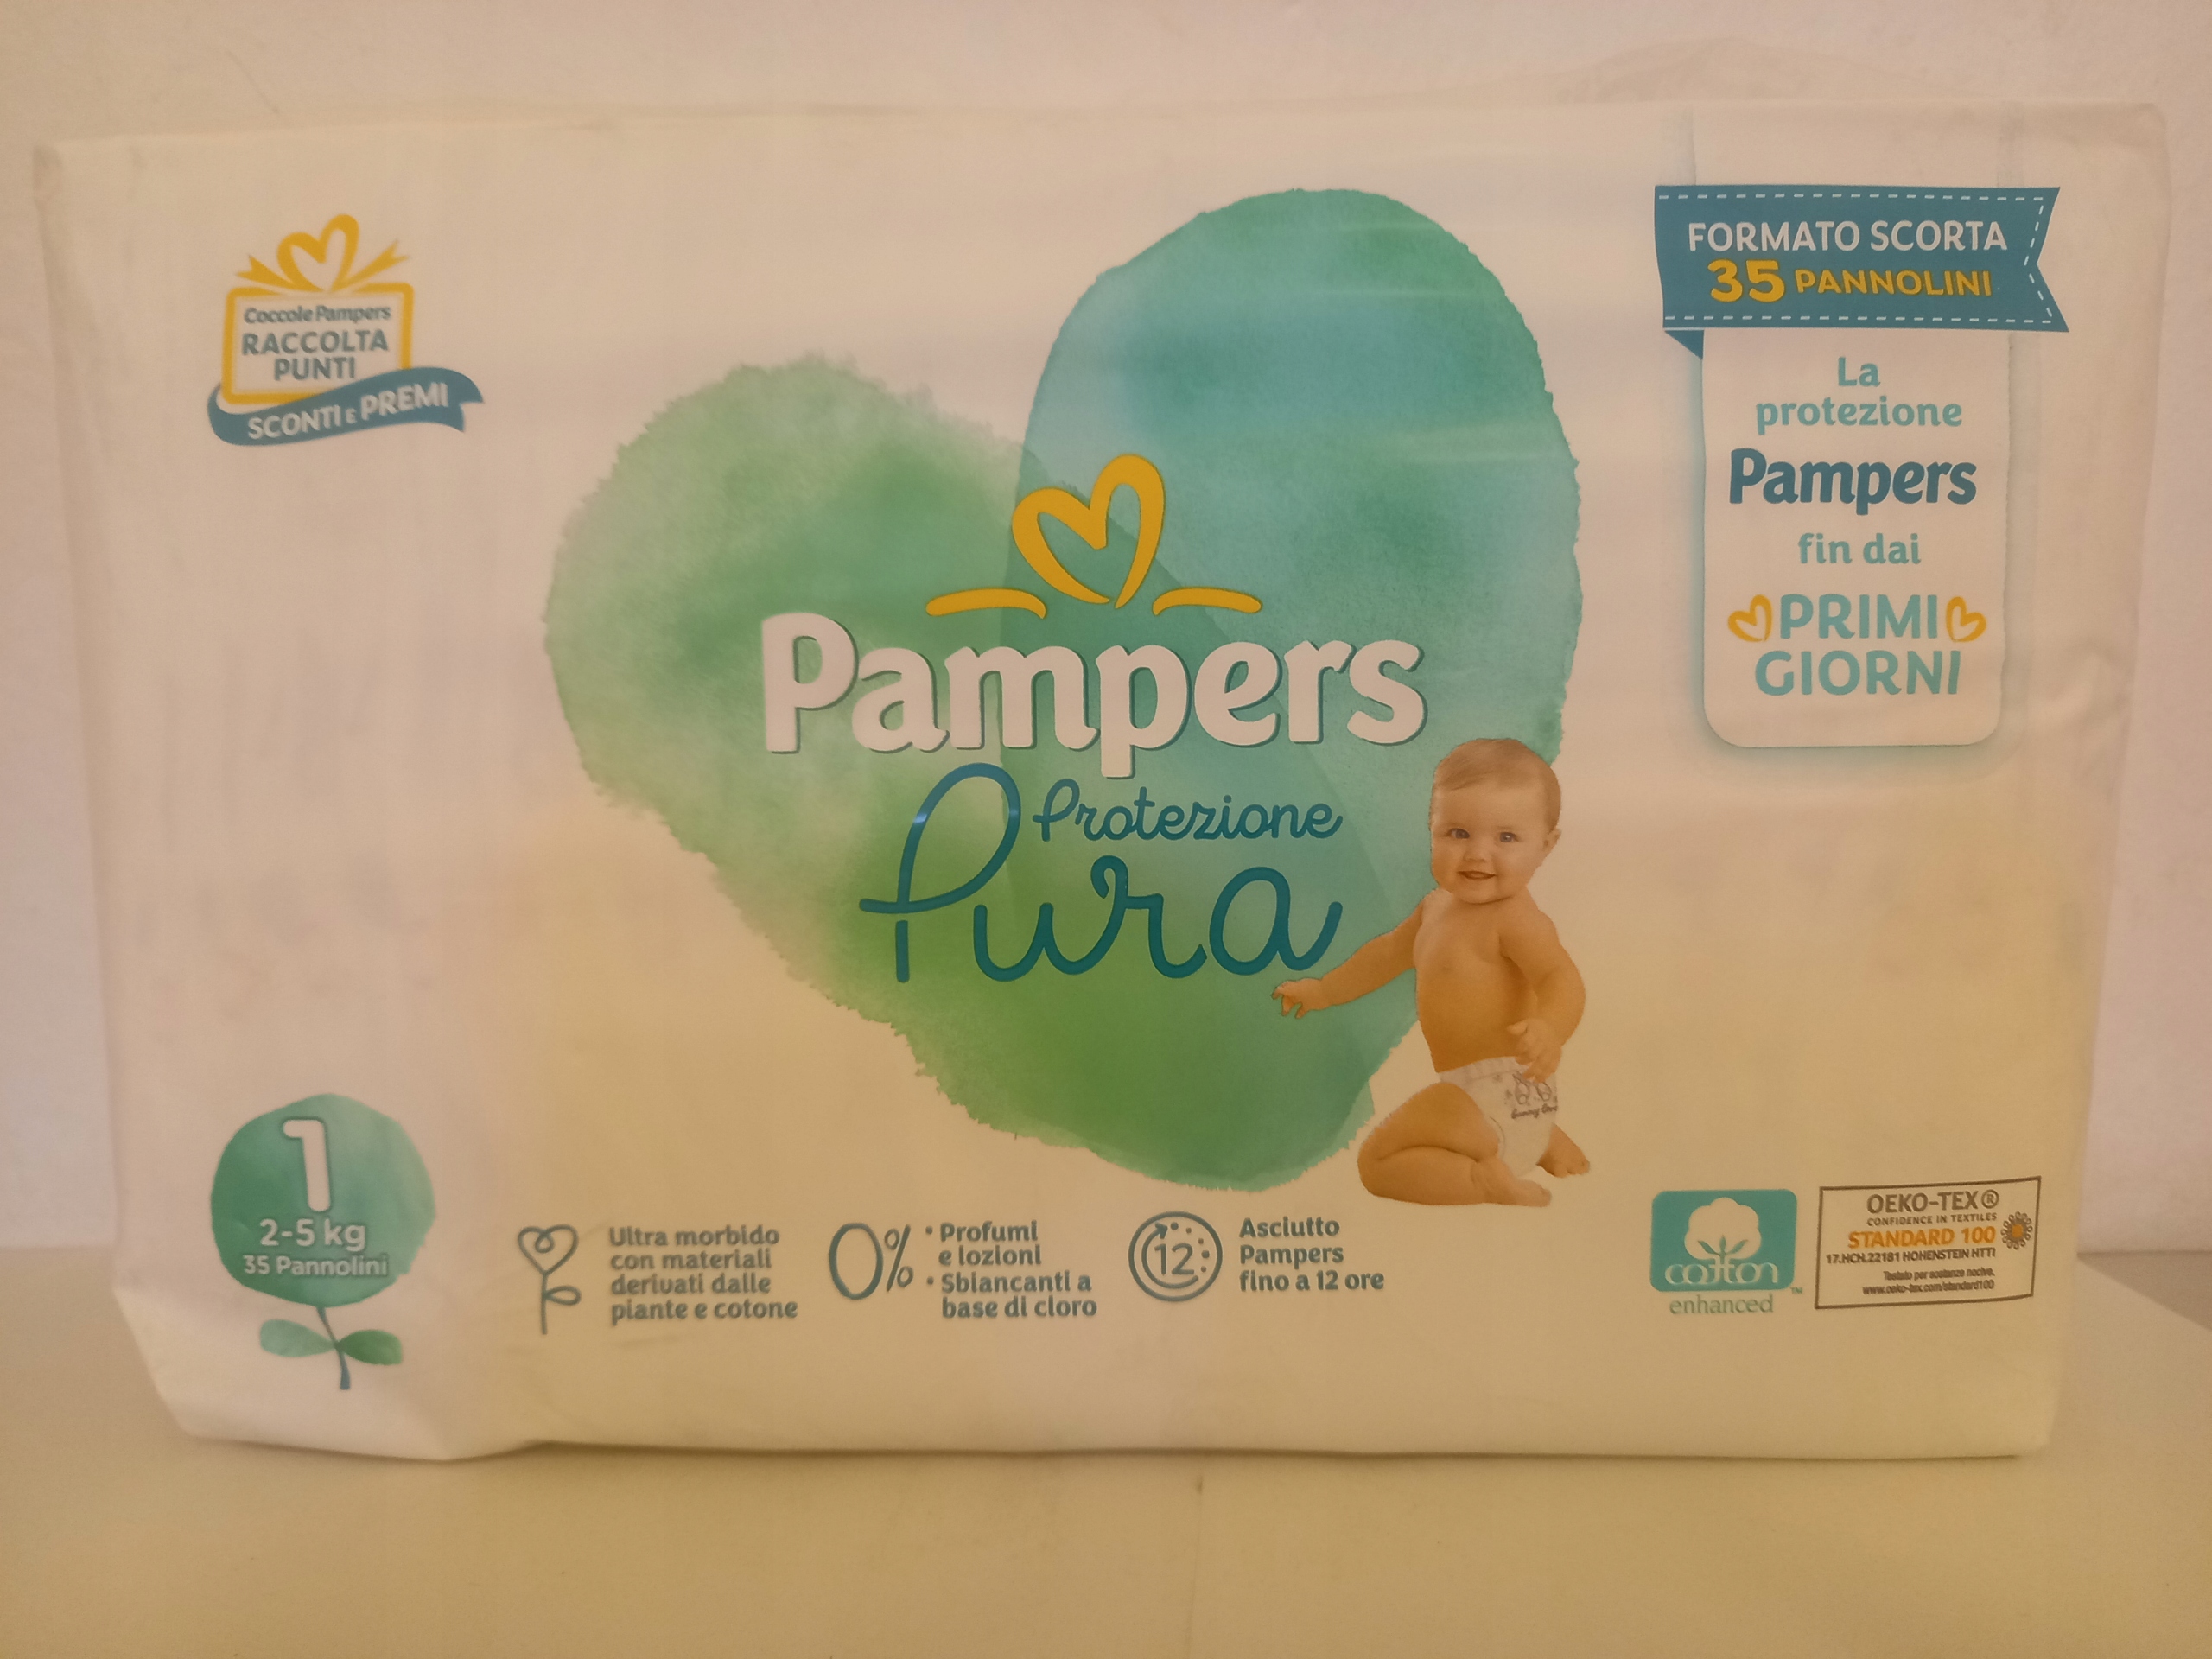 pampers easy ups girls size 6